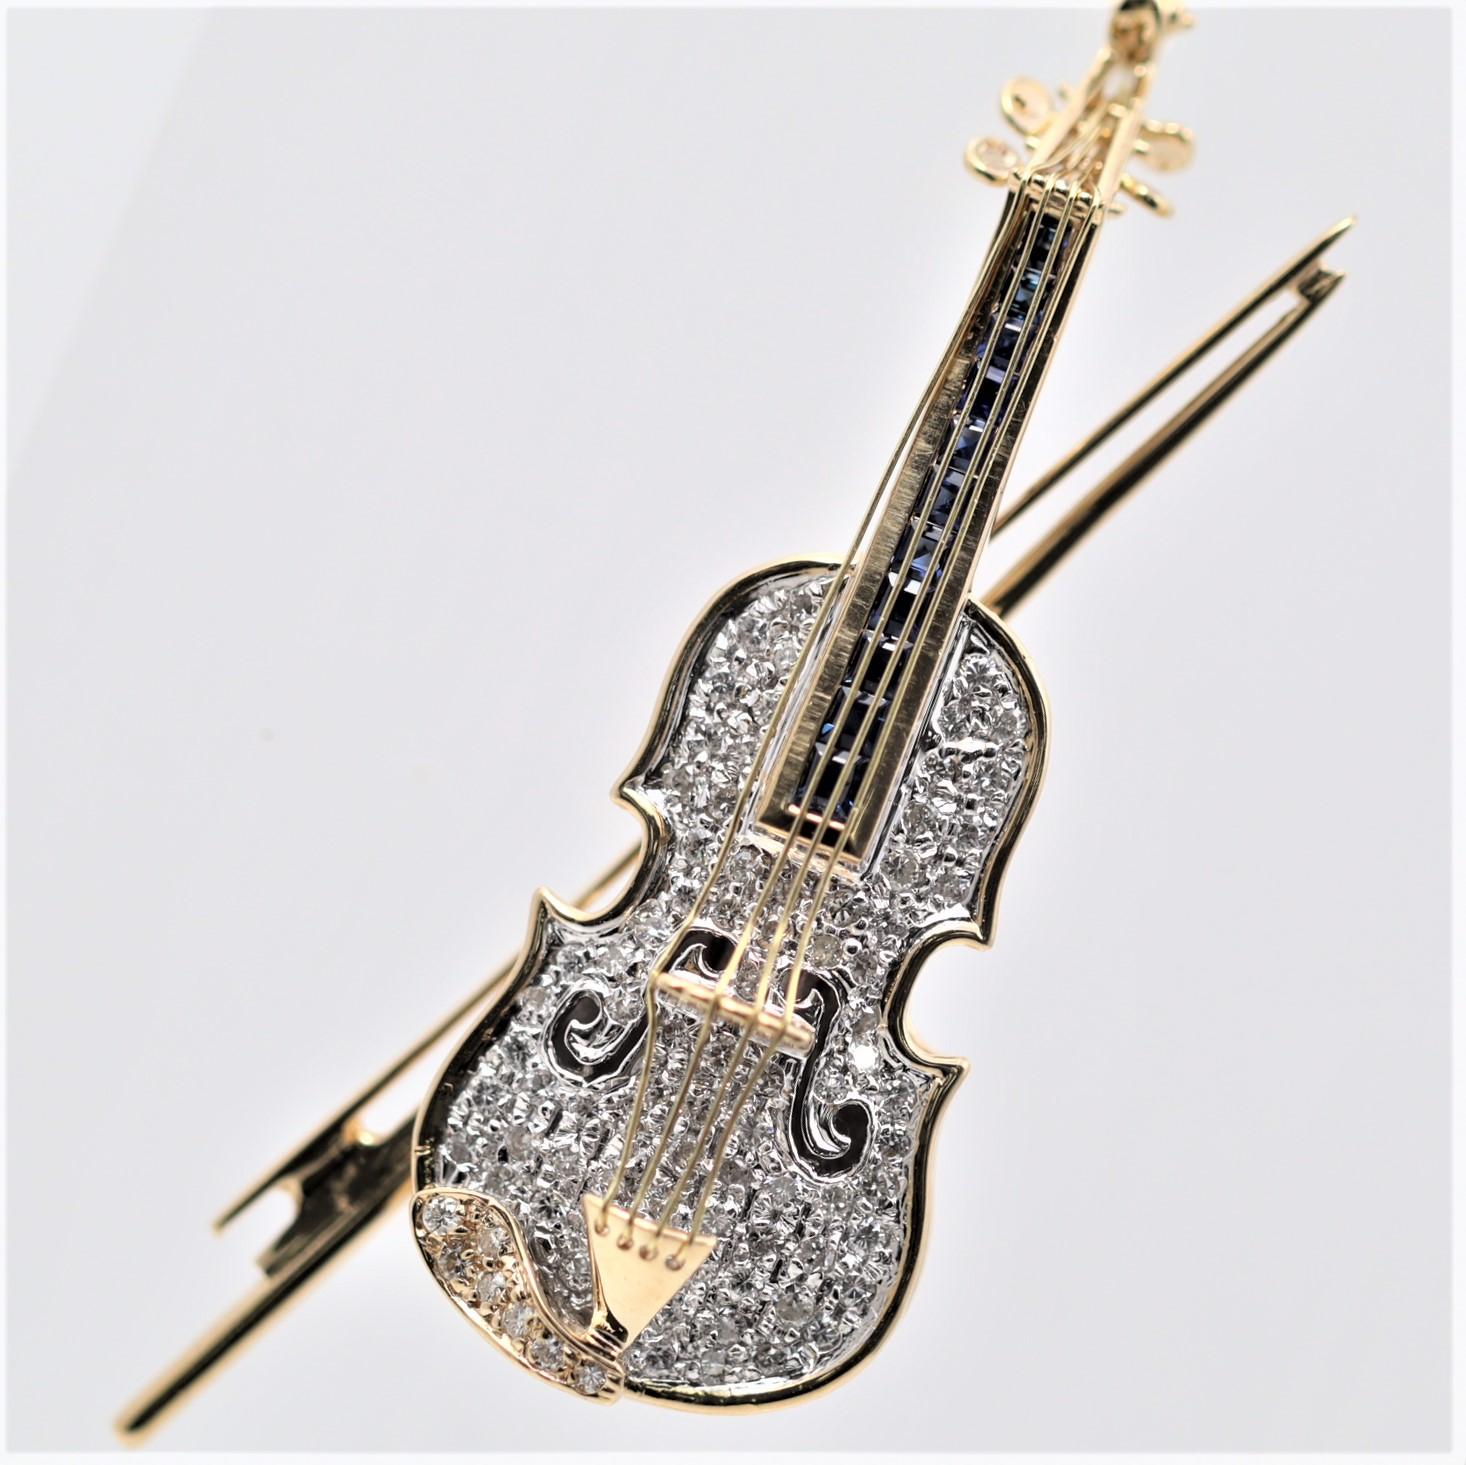 A precious violin made in 18k yellow gold! It features 0.74 carats of round brilliant-cut diamonds along with a row of square-shape blue sapphire under the strings weighing 0.55 carats. The back of the brooch is hand-polished and textured to appear